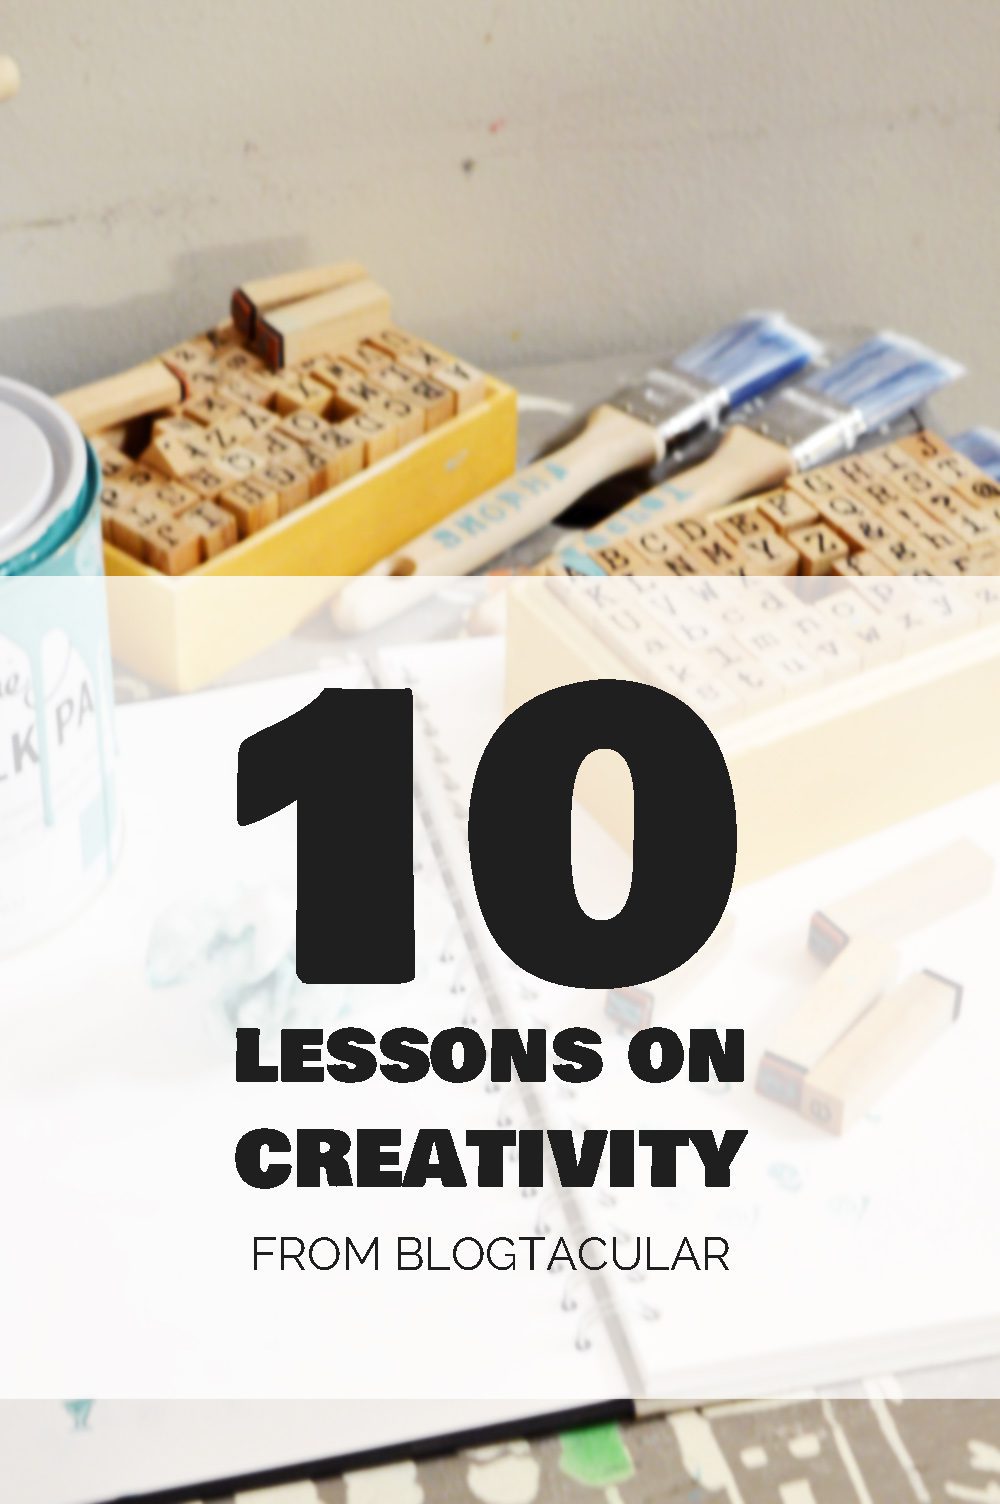 10 things I learnt about creativity at #Blogtacular 2015